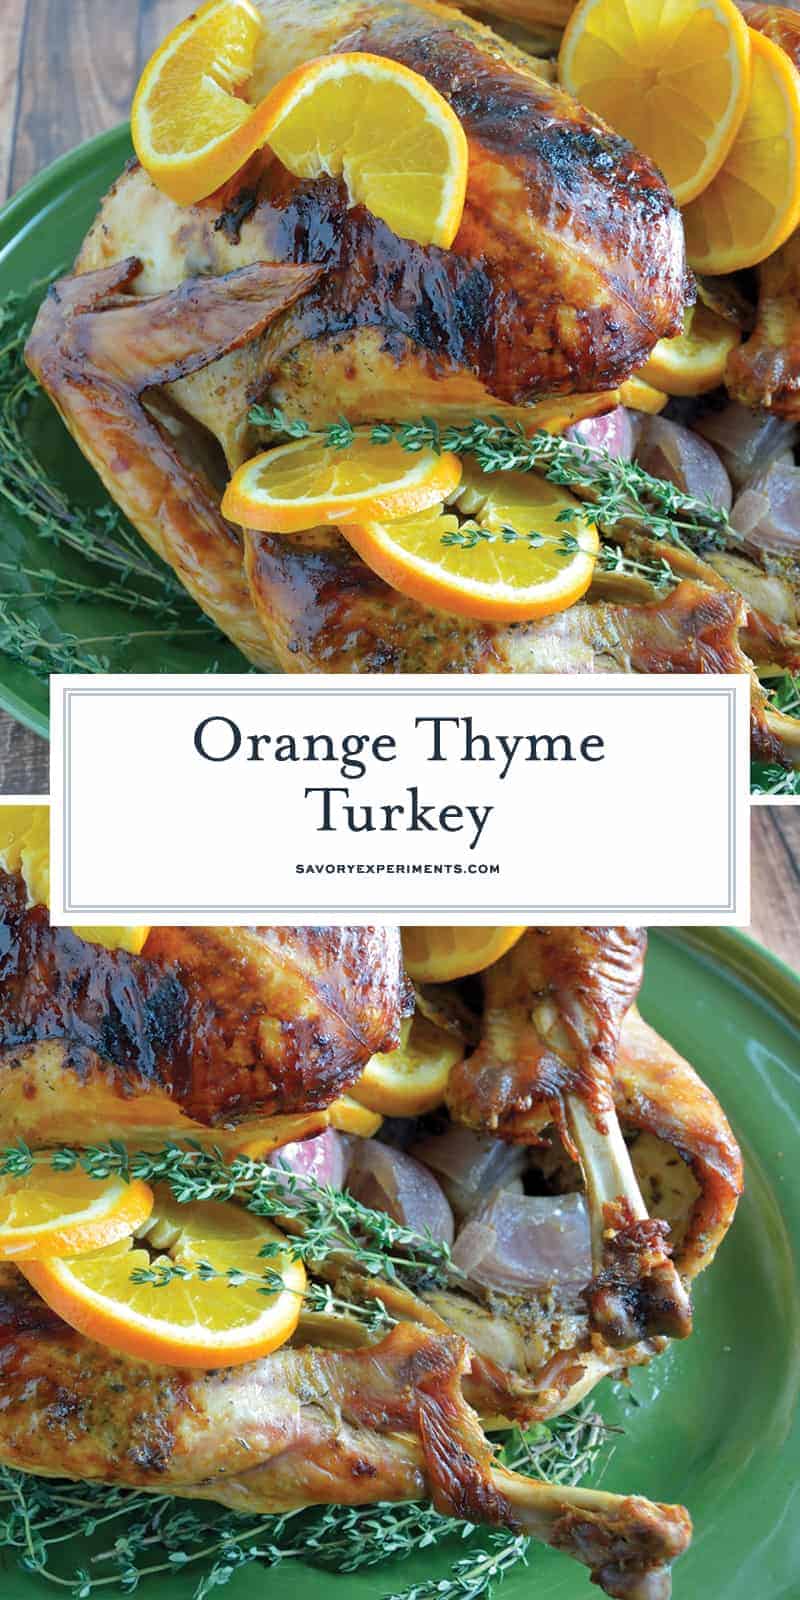 Orange Thyme Turkey is the BEST roasted turkey recipe for juicy turkey and guaranteed to give you the best drippings to make a flavorful gravy.  #roastturkey #thanksgiving www.savoryexperiments.com